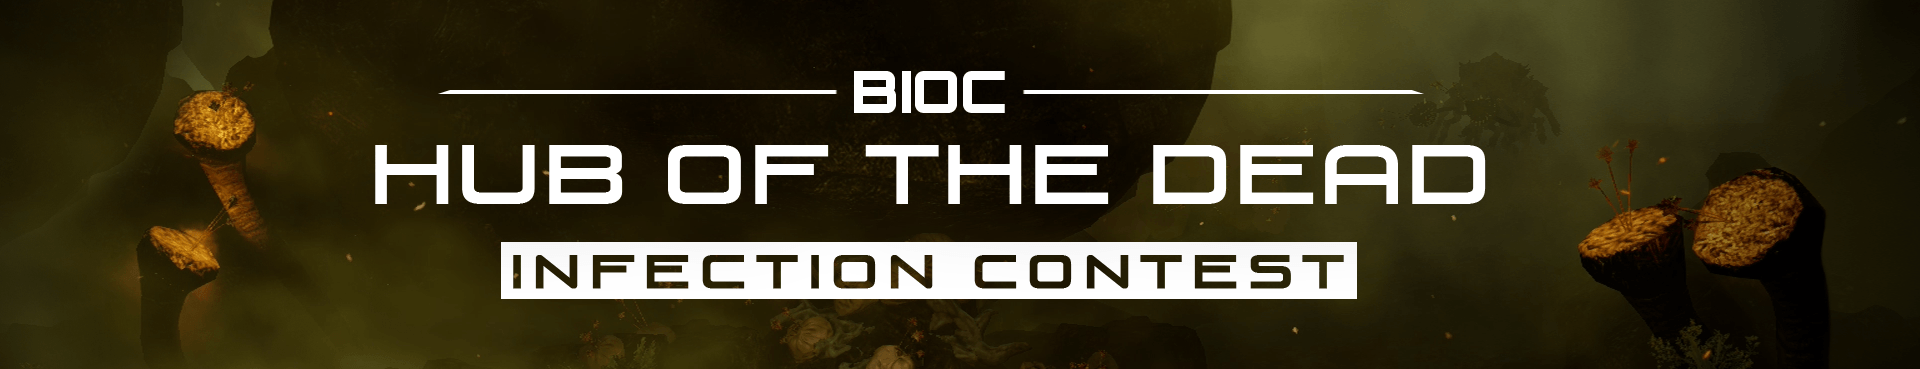 infection_contest_header